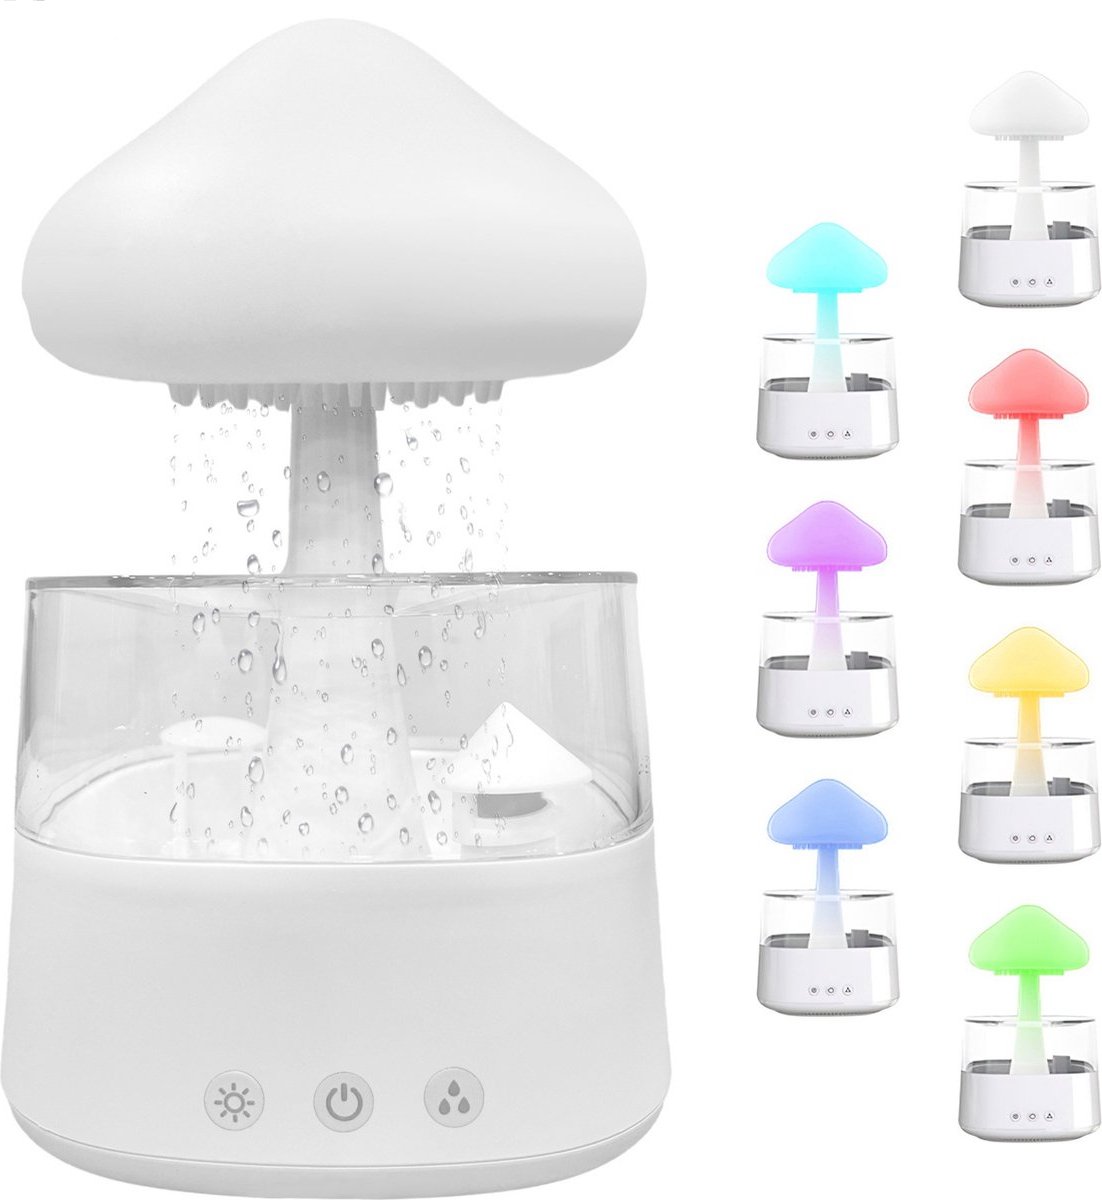 TheBee - Regendruppel Humidifier - luchtbevochtiger - Humidifier - Aroma Diffuser - Rain cloud humidifier - Led - stijlvol ontwerp - diffuser - Aroma - druppel diffuser - druppel humidifier - Nieuw ontwerp - nachtlampje - nachtlamp